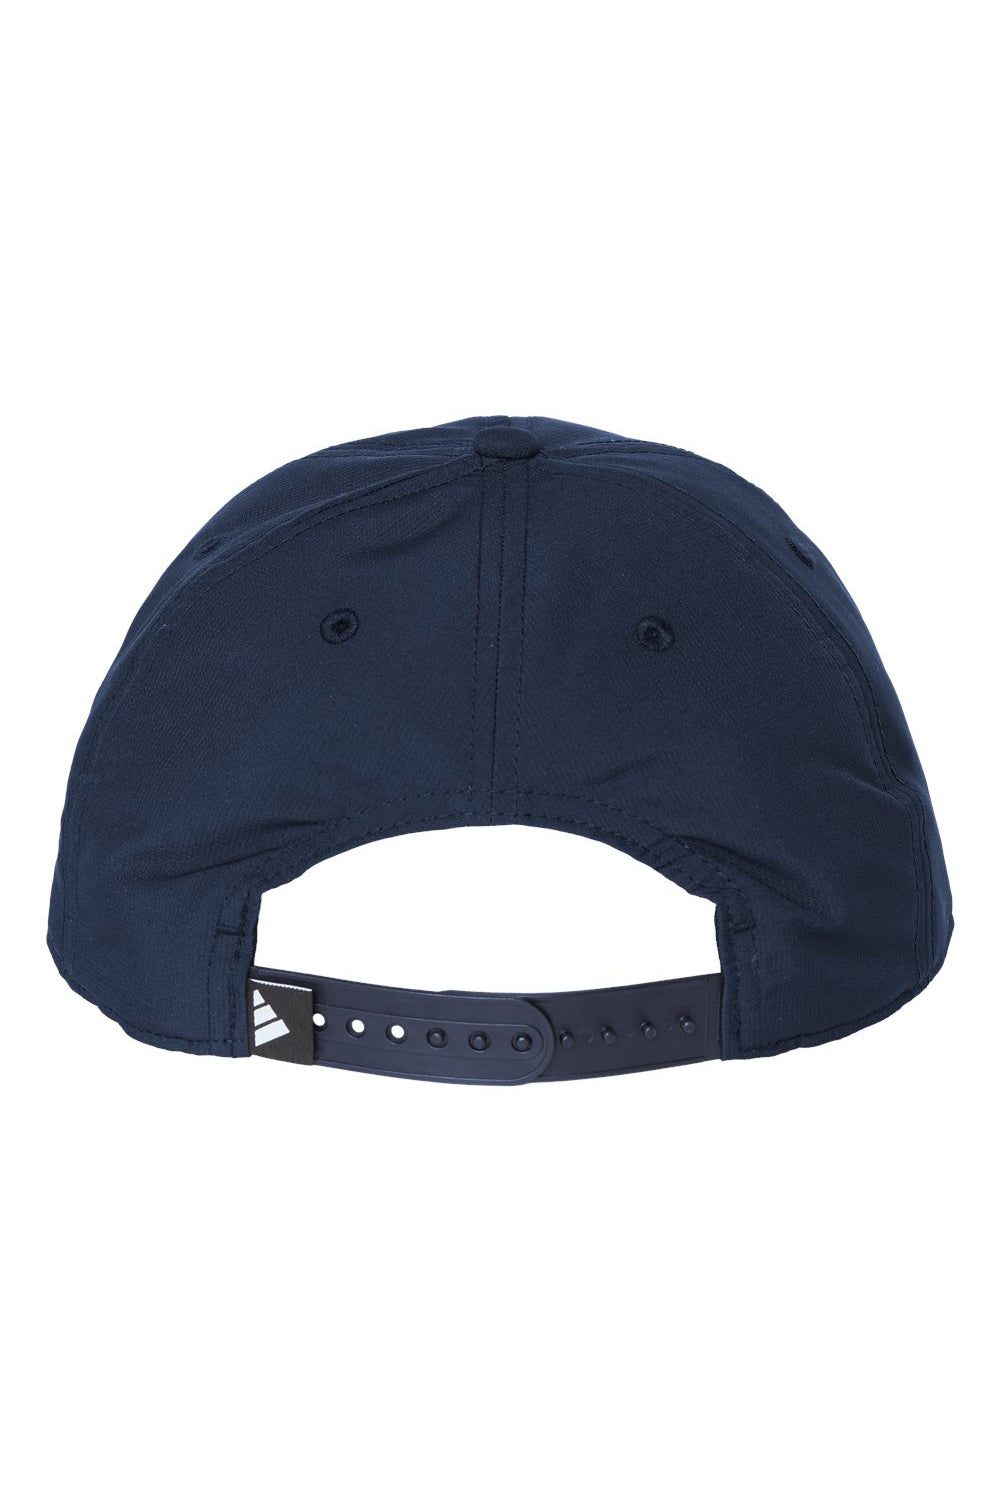 Adidas A600S Mens Sustainable Performance Max Moisture Wicking Snapback Hat Collegiate Navy Blue Flat Back